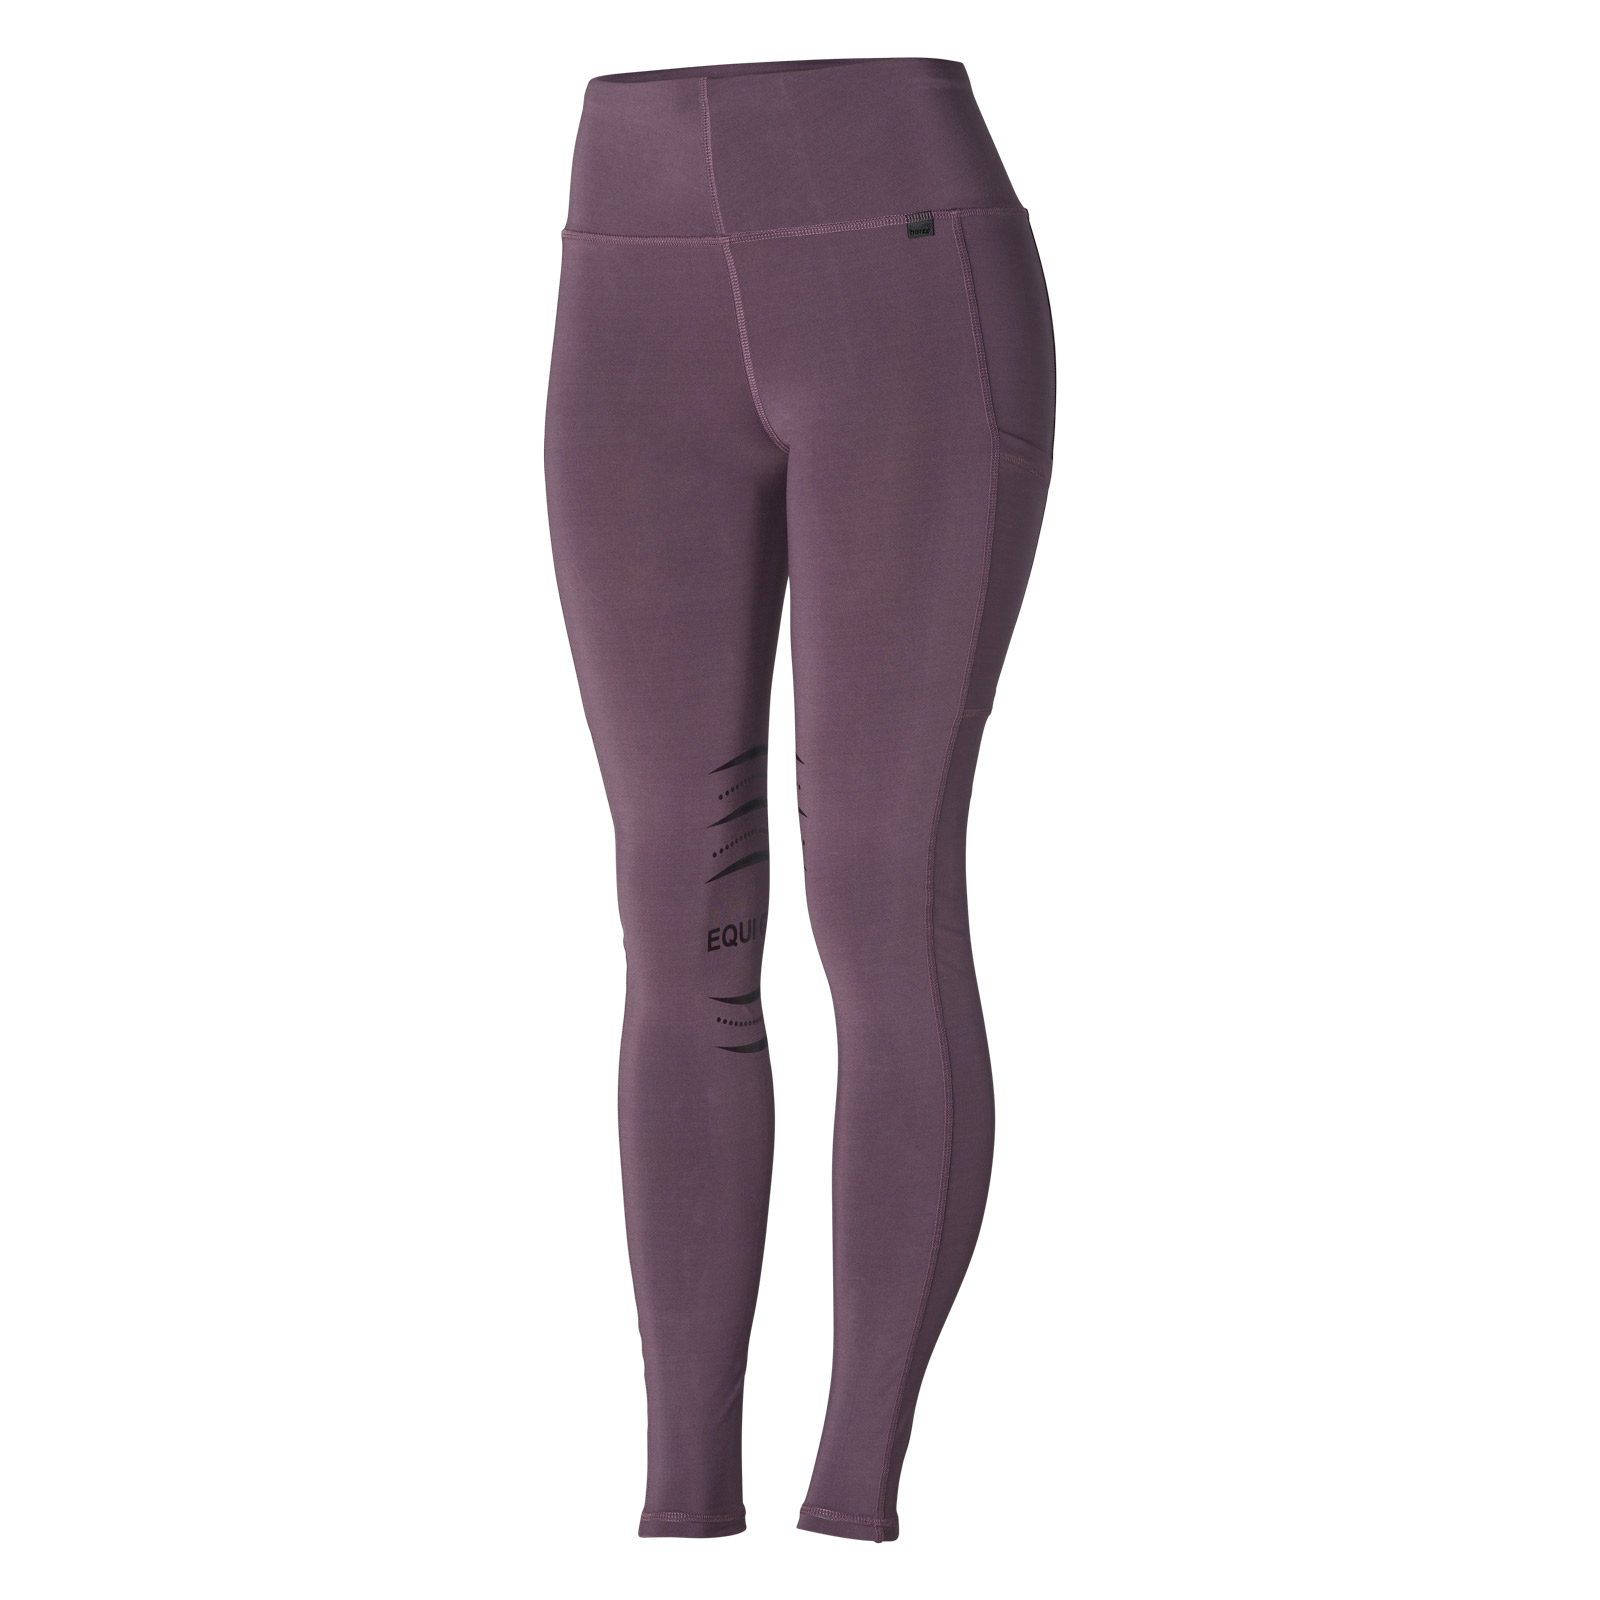 Women's Horse Riding Leggings. Ladies Riding Tights with phone pocket. –  Saddle & Canter